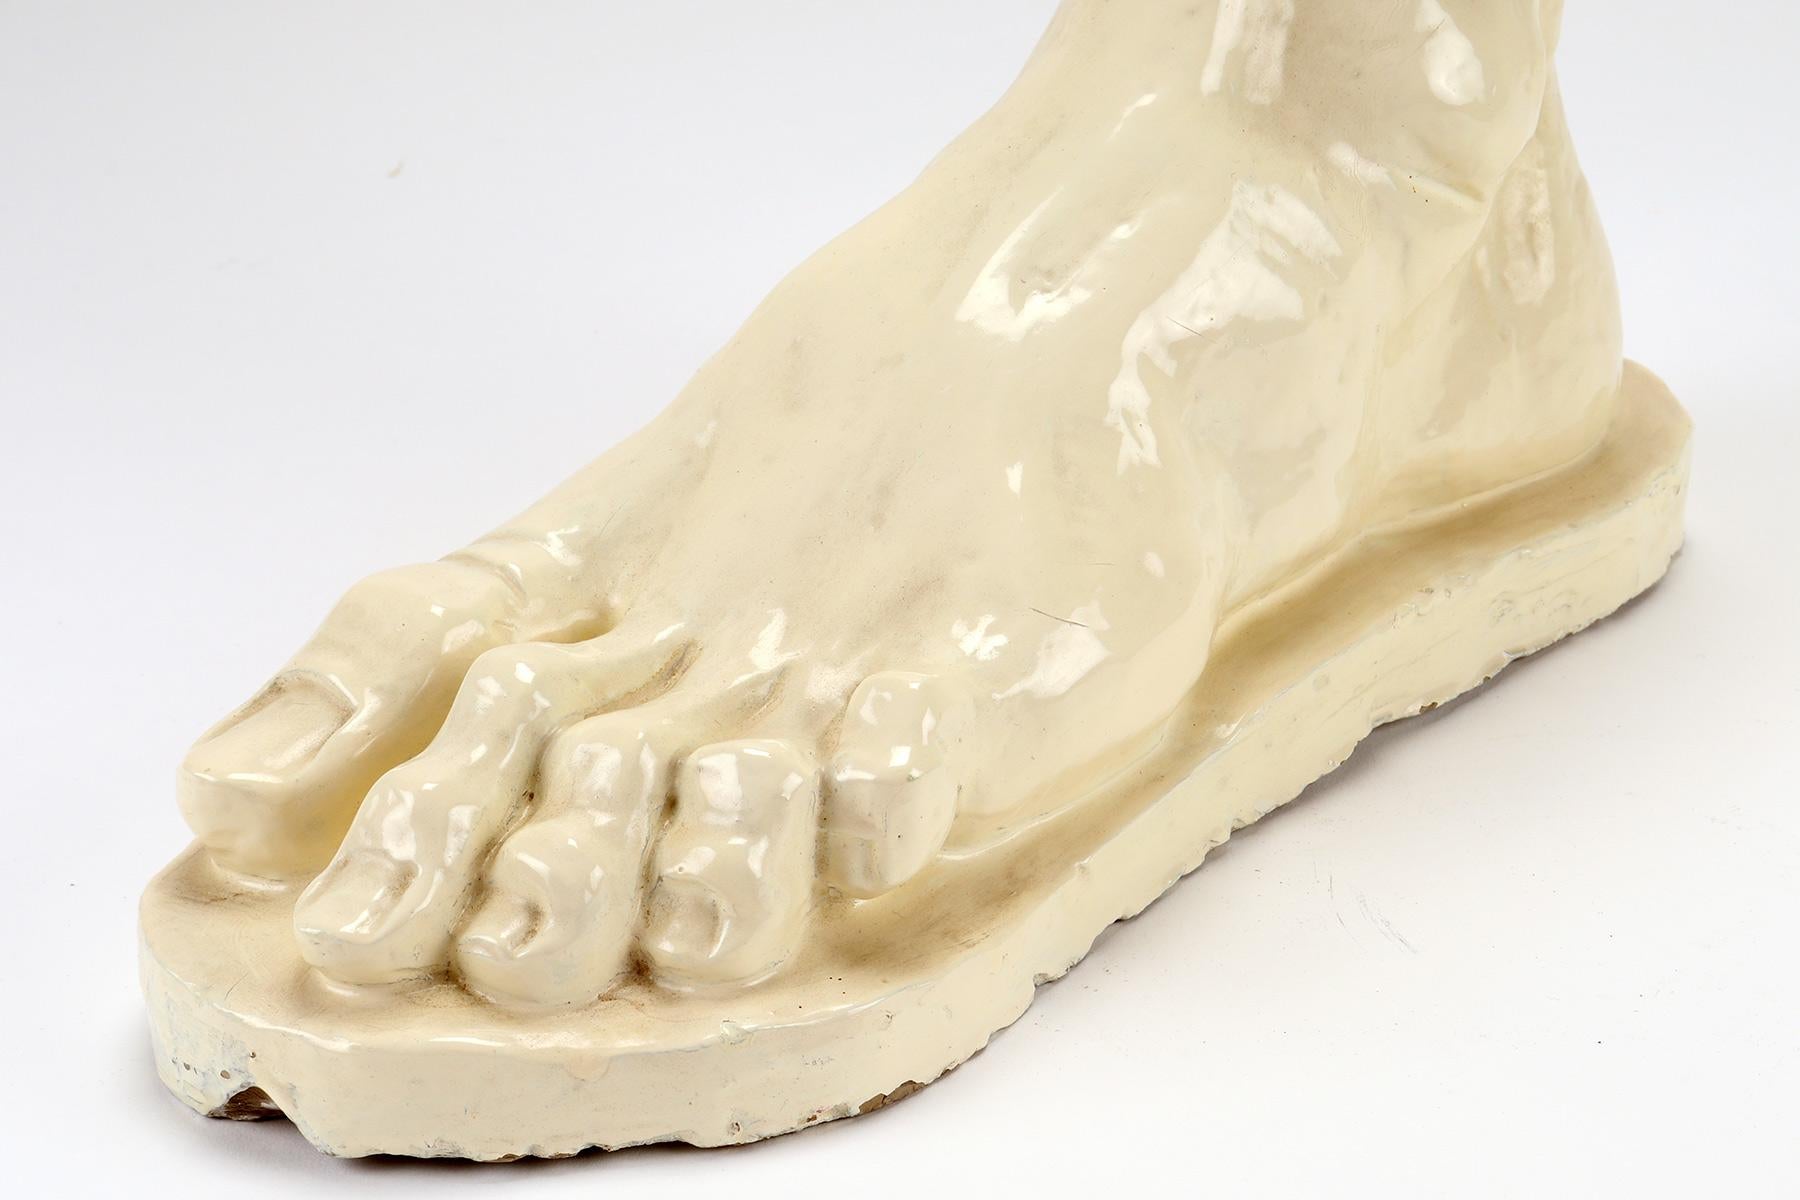 Glazed Clay Sculpture Depicting a Foot, Italy, 1900 For Sale 1